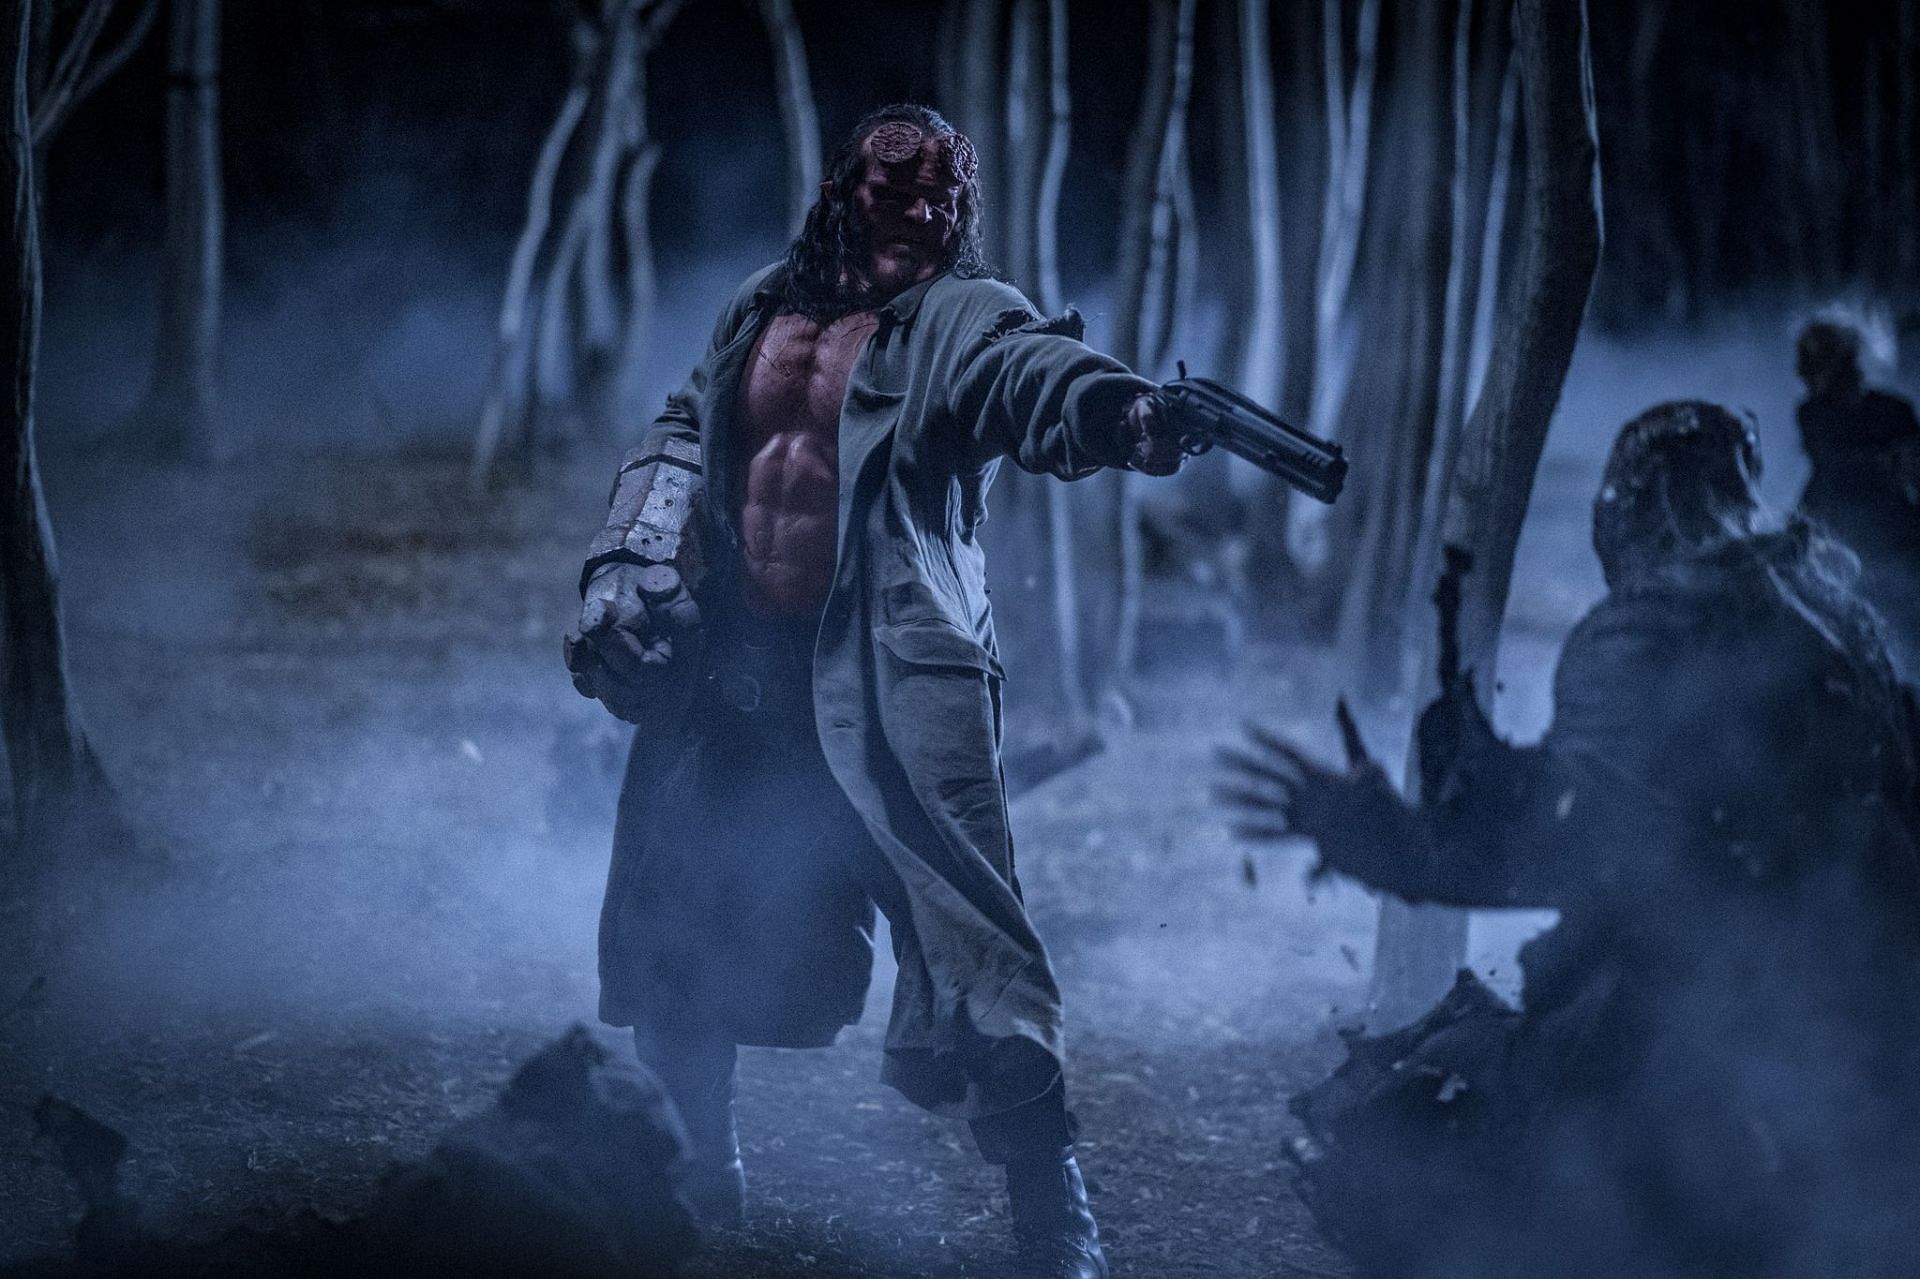 Hellboy, the iconic demon superhero, is set to return in a new reboot titled Hellboy: The Crooked Man (Image via Lionsgate)